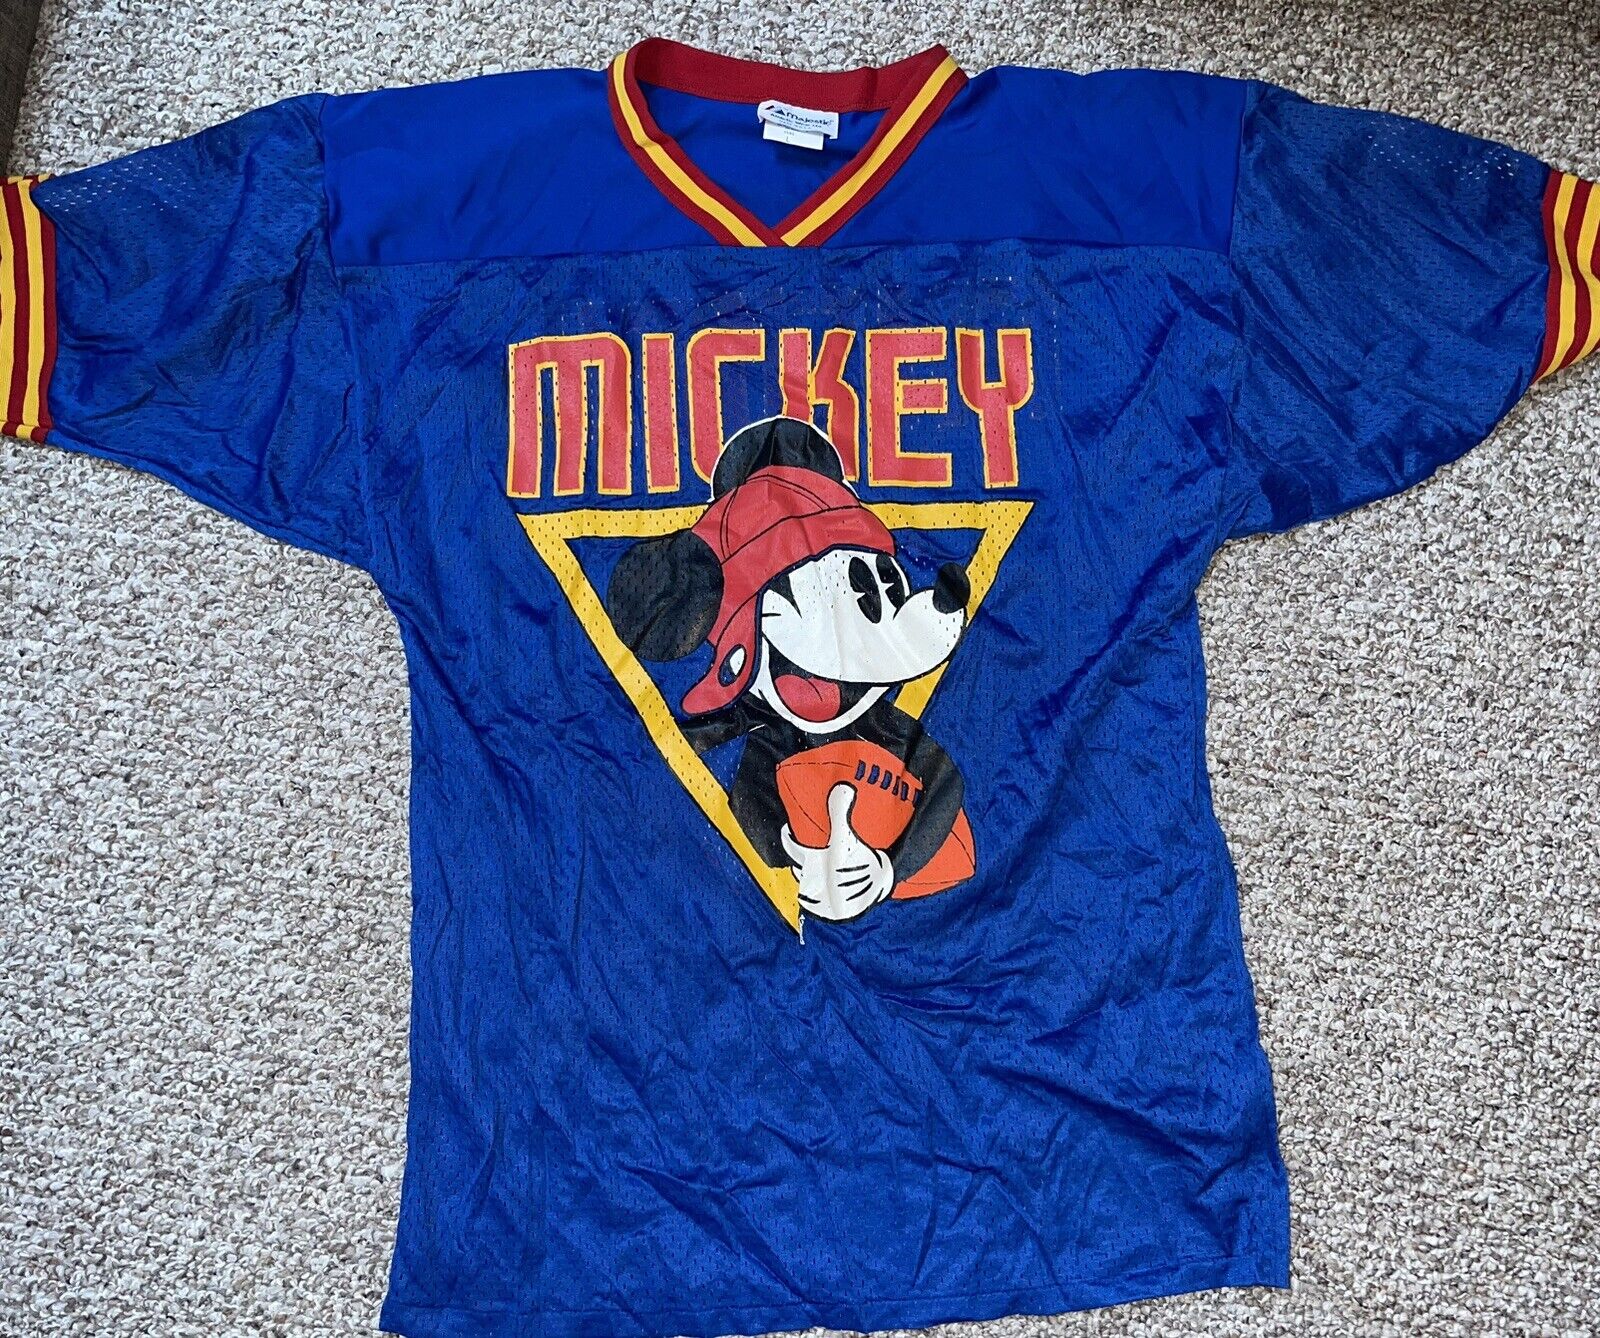 MICKEY MOUSE VINTAGE FOOTBALL STYLE SHIRT LARGE MENS MAJESTIC 80s SUPER RARE